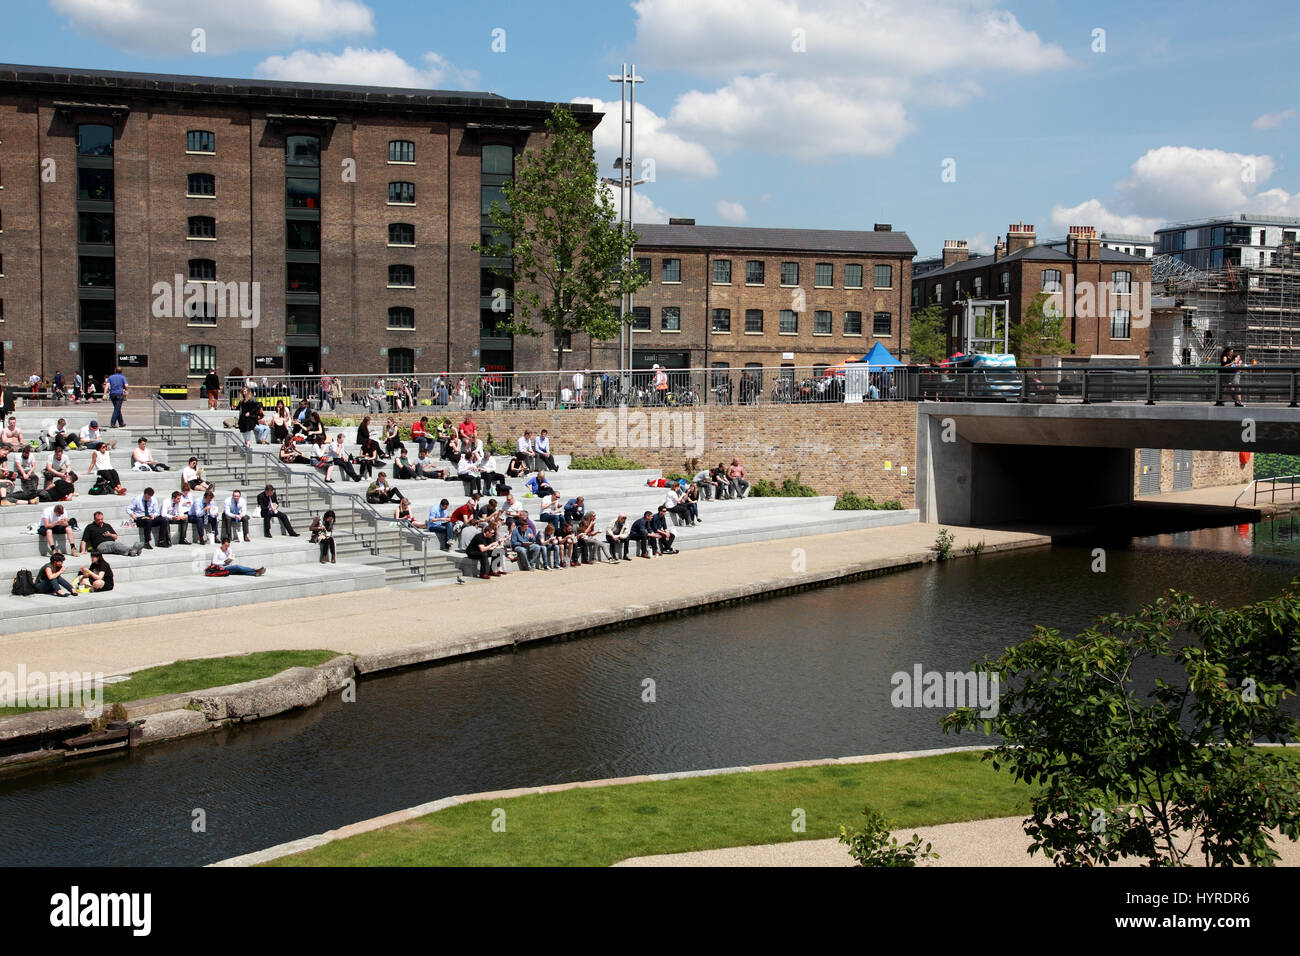 Students from Central St. Martins art school, UAL, enjoying the sun in Granary Square by Regent’s Canal, King’s Cross, London Stock Photo